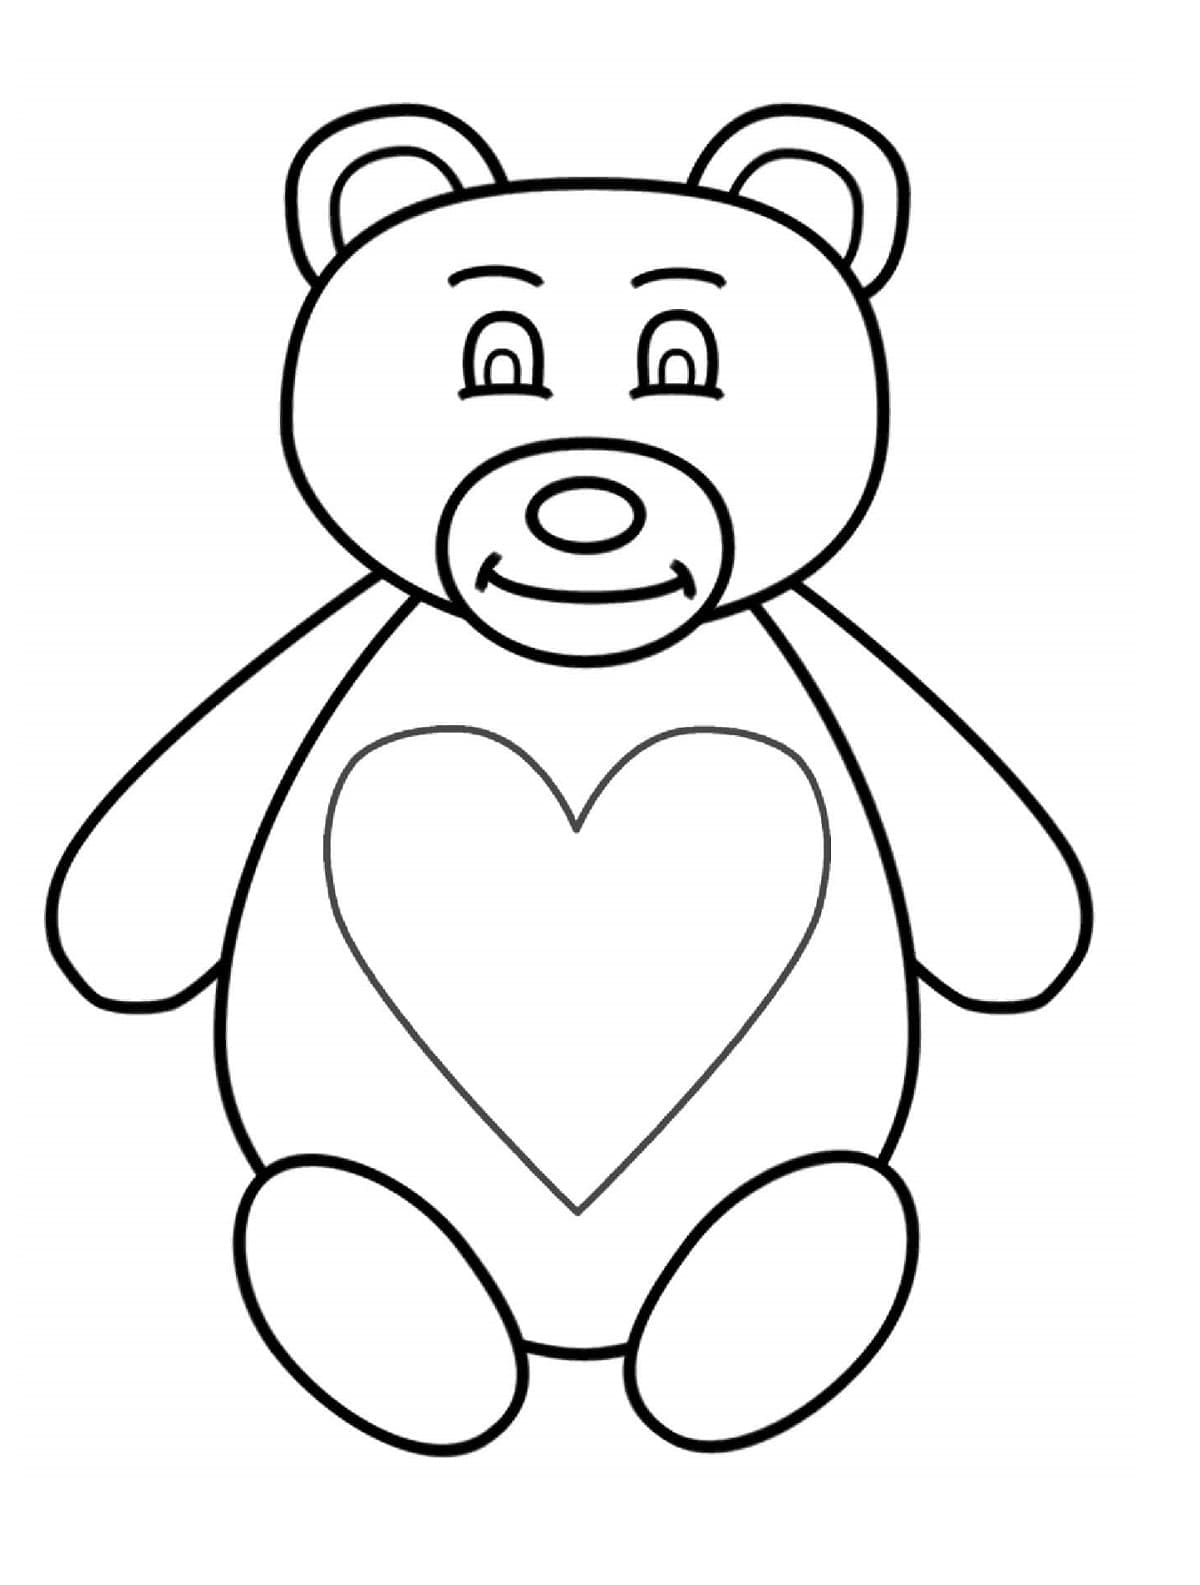 Printable Heart Teddy Bear Coloring Page